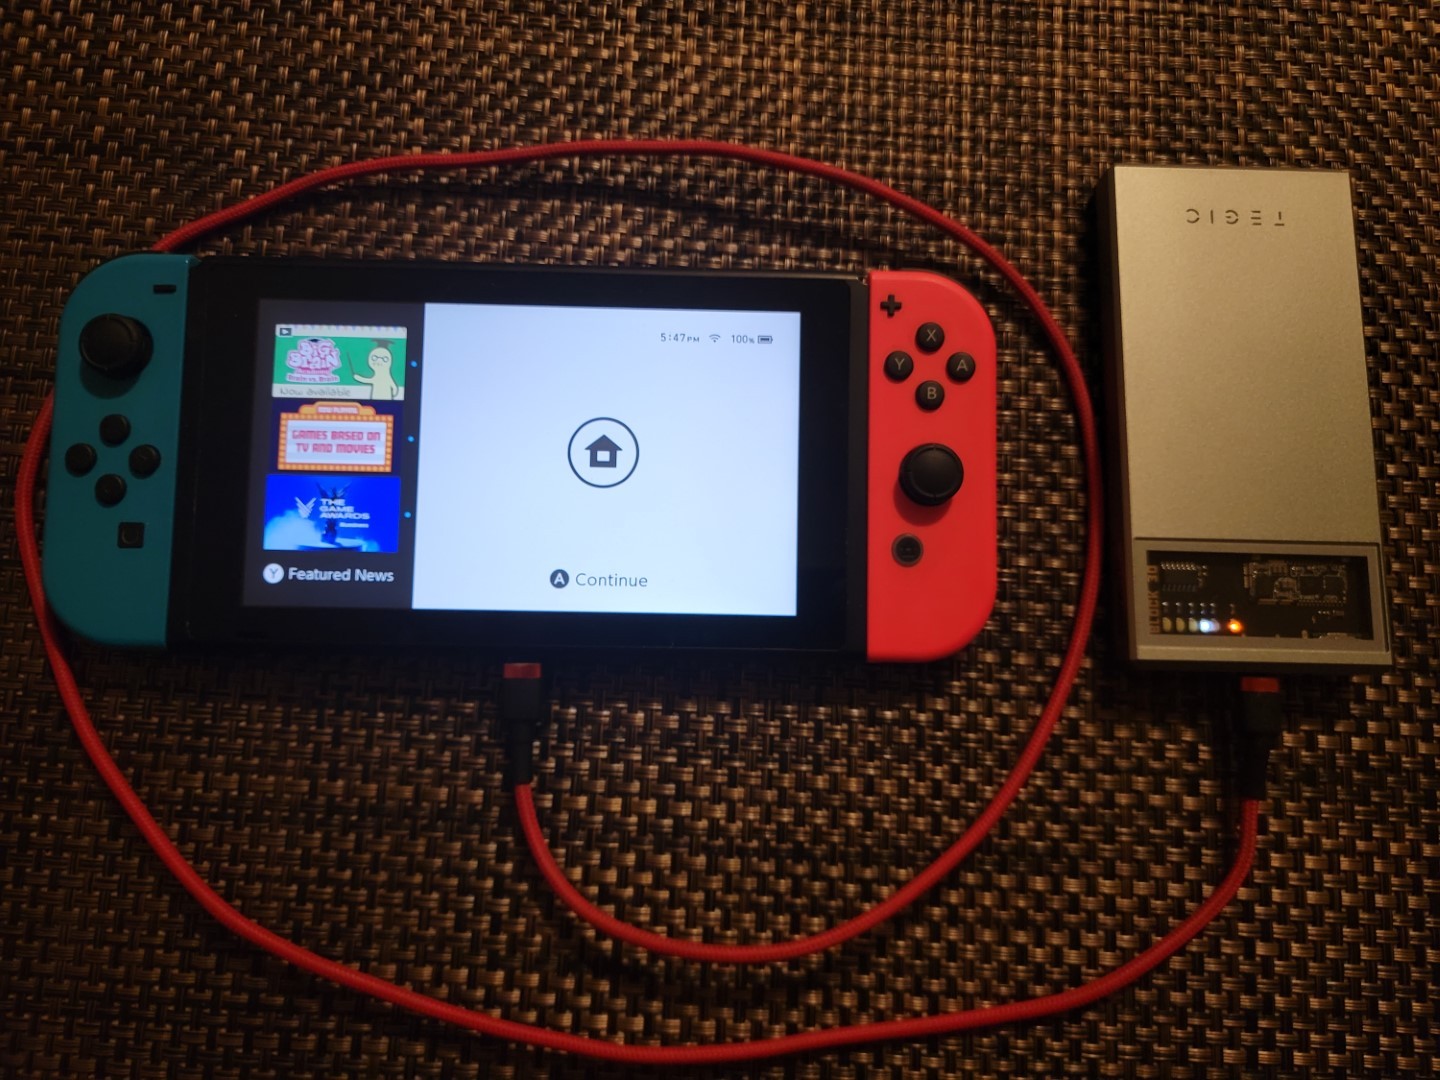 Nintendo Switch charged with the TEGIC Block 30 Power bank